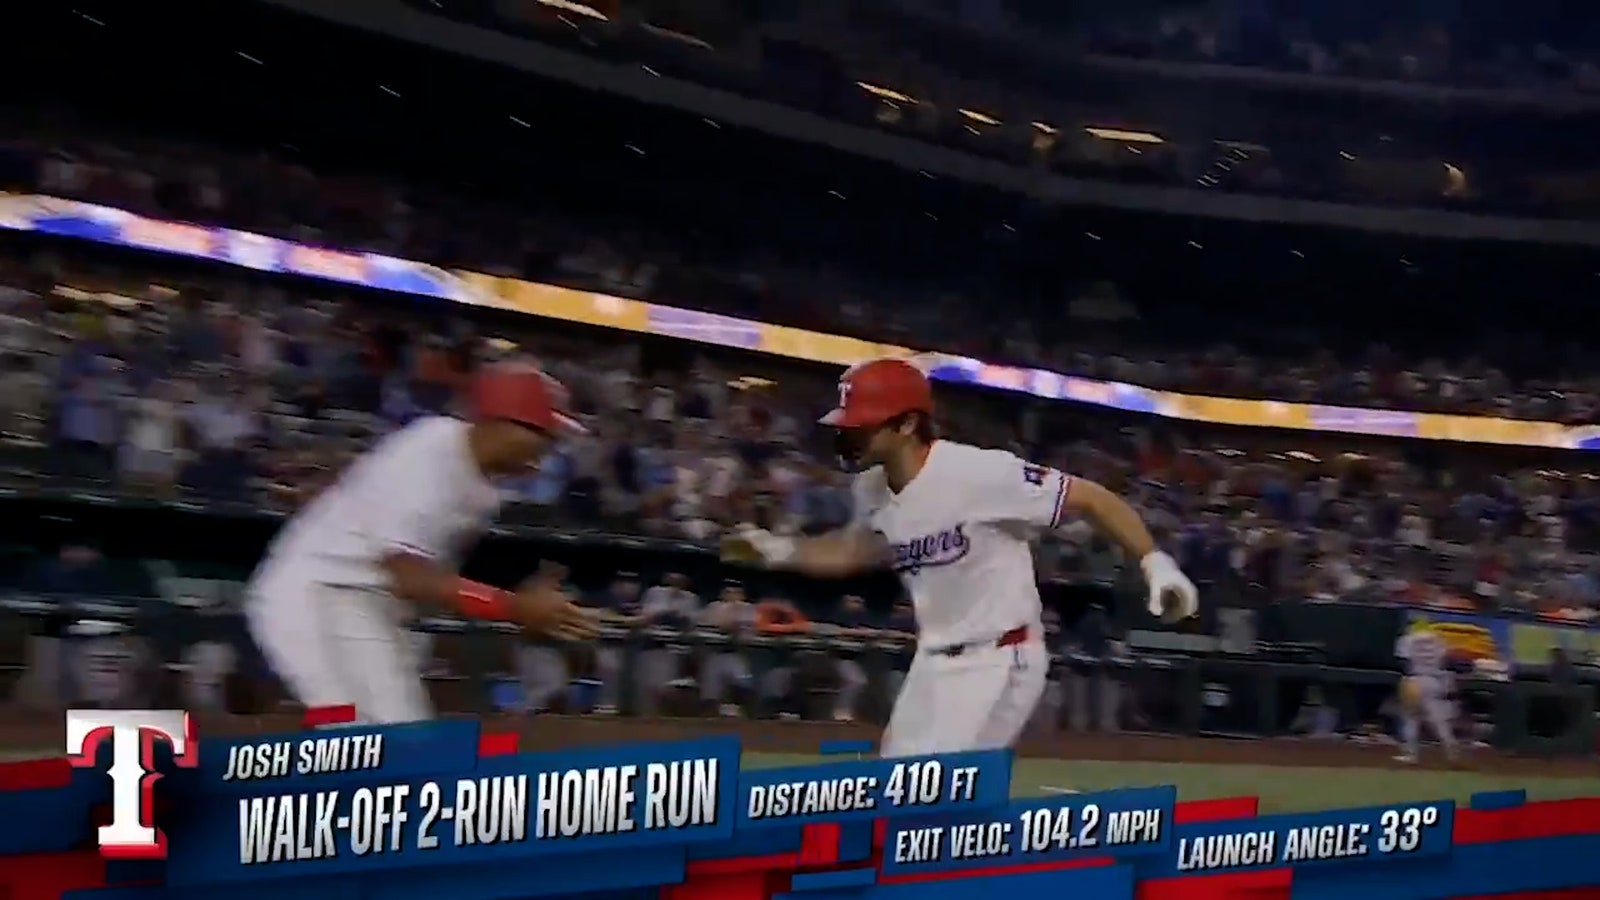 Josh Smith hits his first career walkoff home run to secure a 4-3 win for the Rangers over the Astros